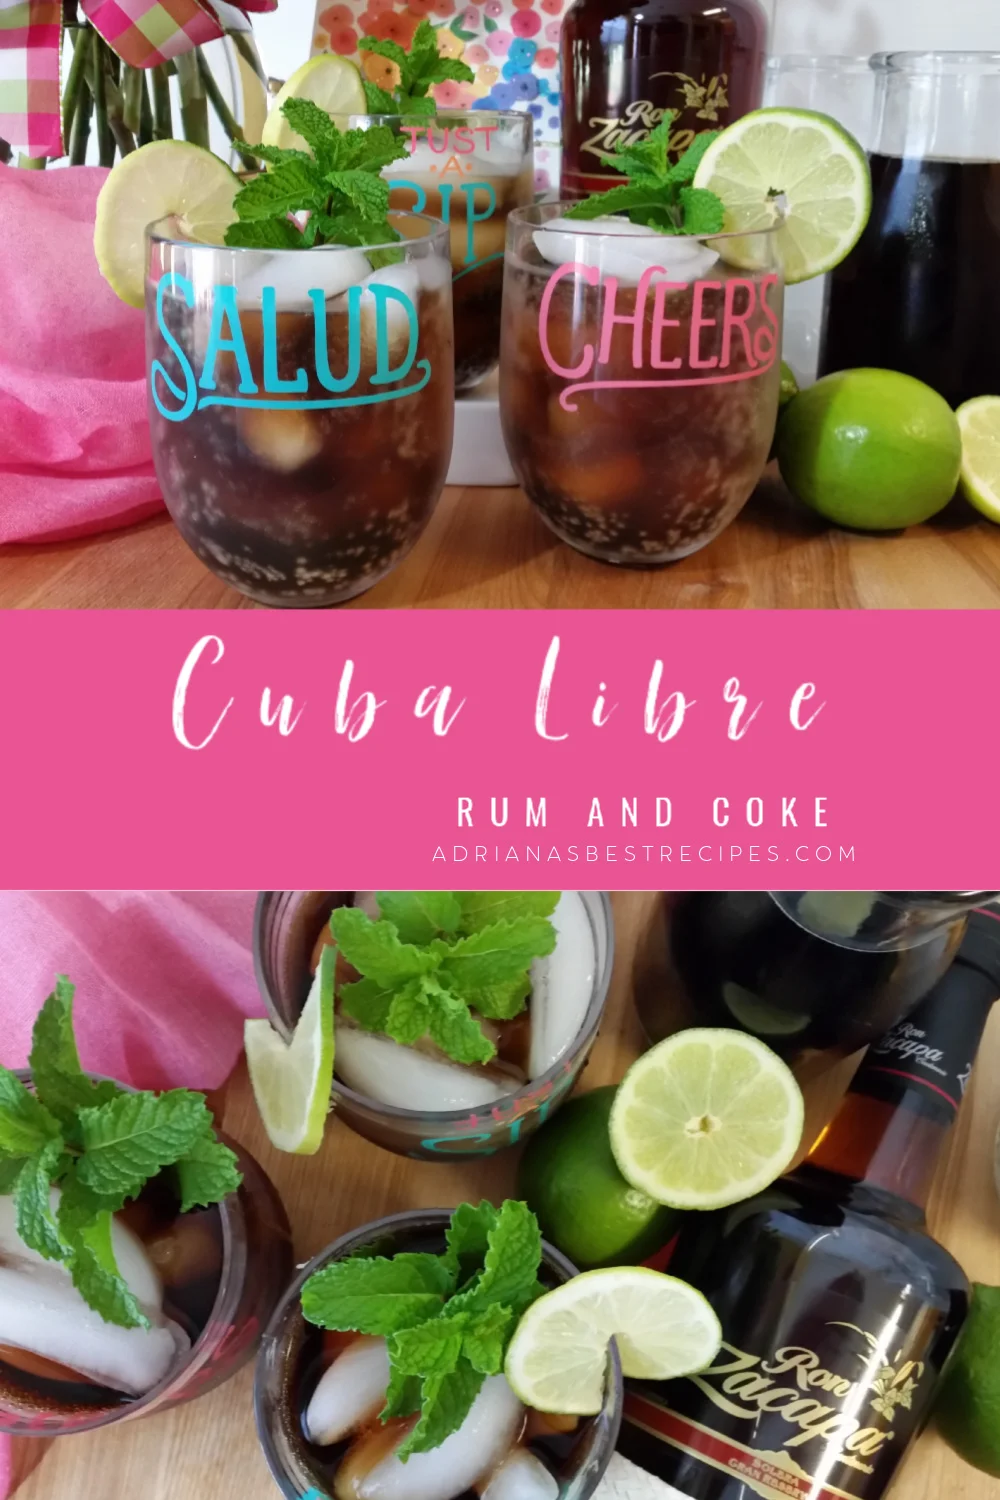 https://www.adrianasbestrecipes.com/wp-content/uploads/2020/05/Cuban-Cocktail-with-rum-and-coke.jpg.webp